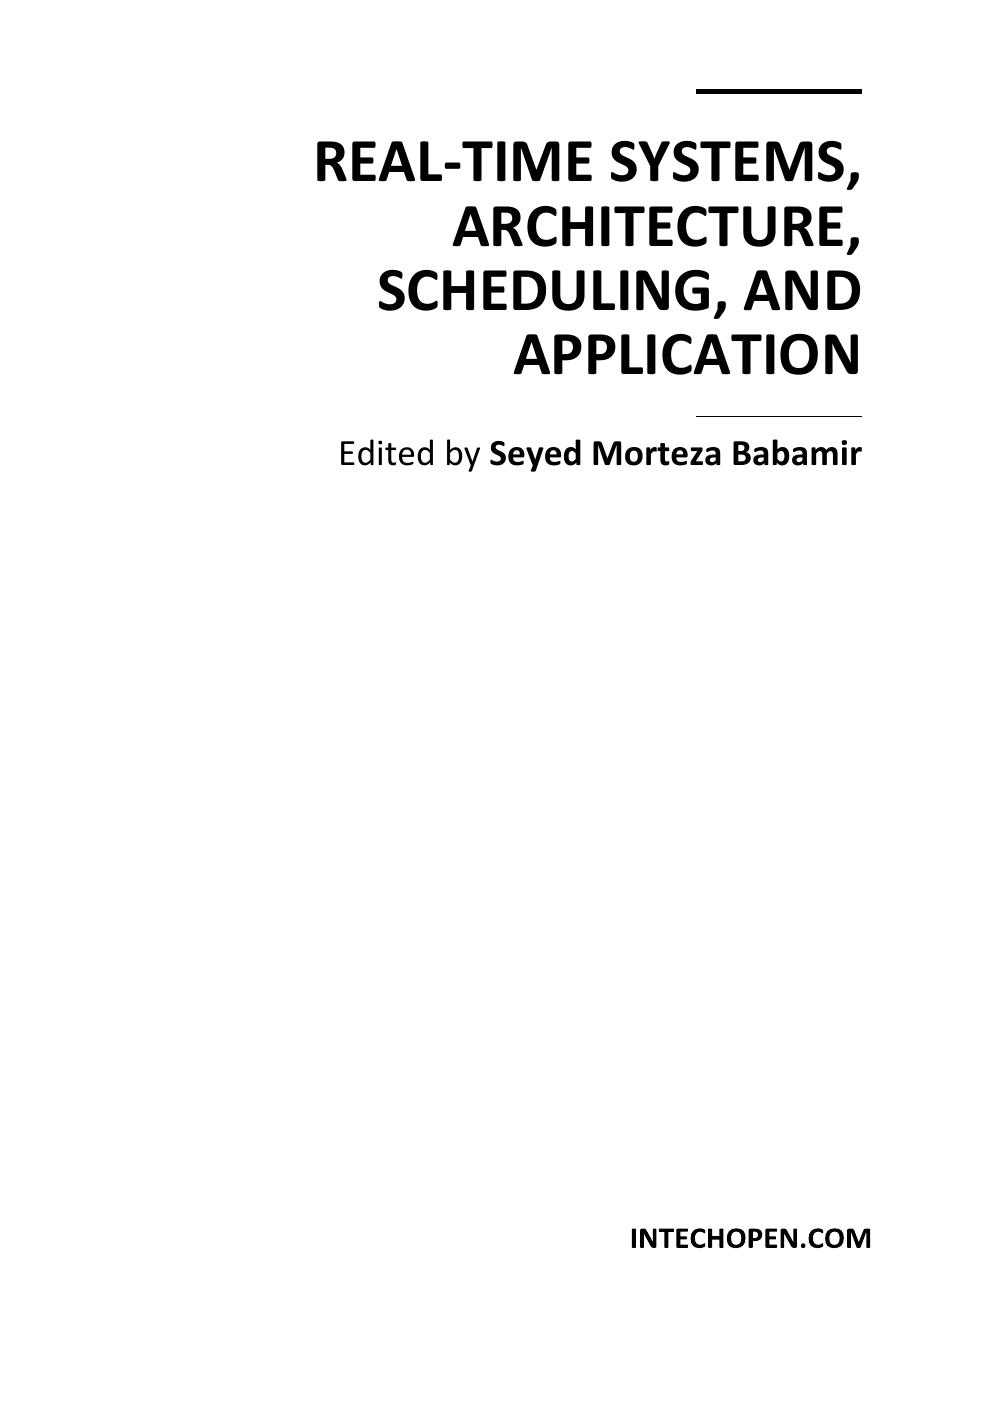 Real-Time Systems  Architecture  Scheduling  and Application 2012.pdf